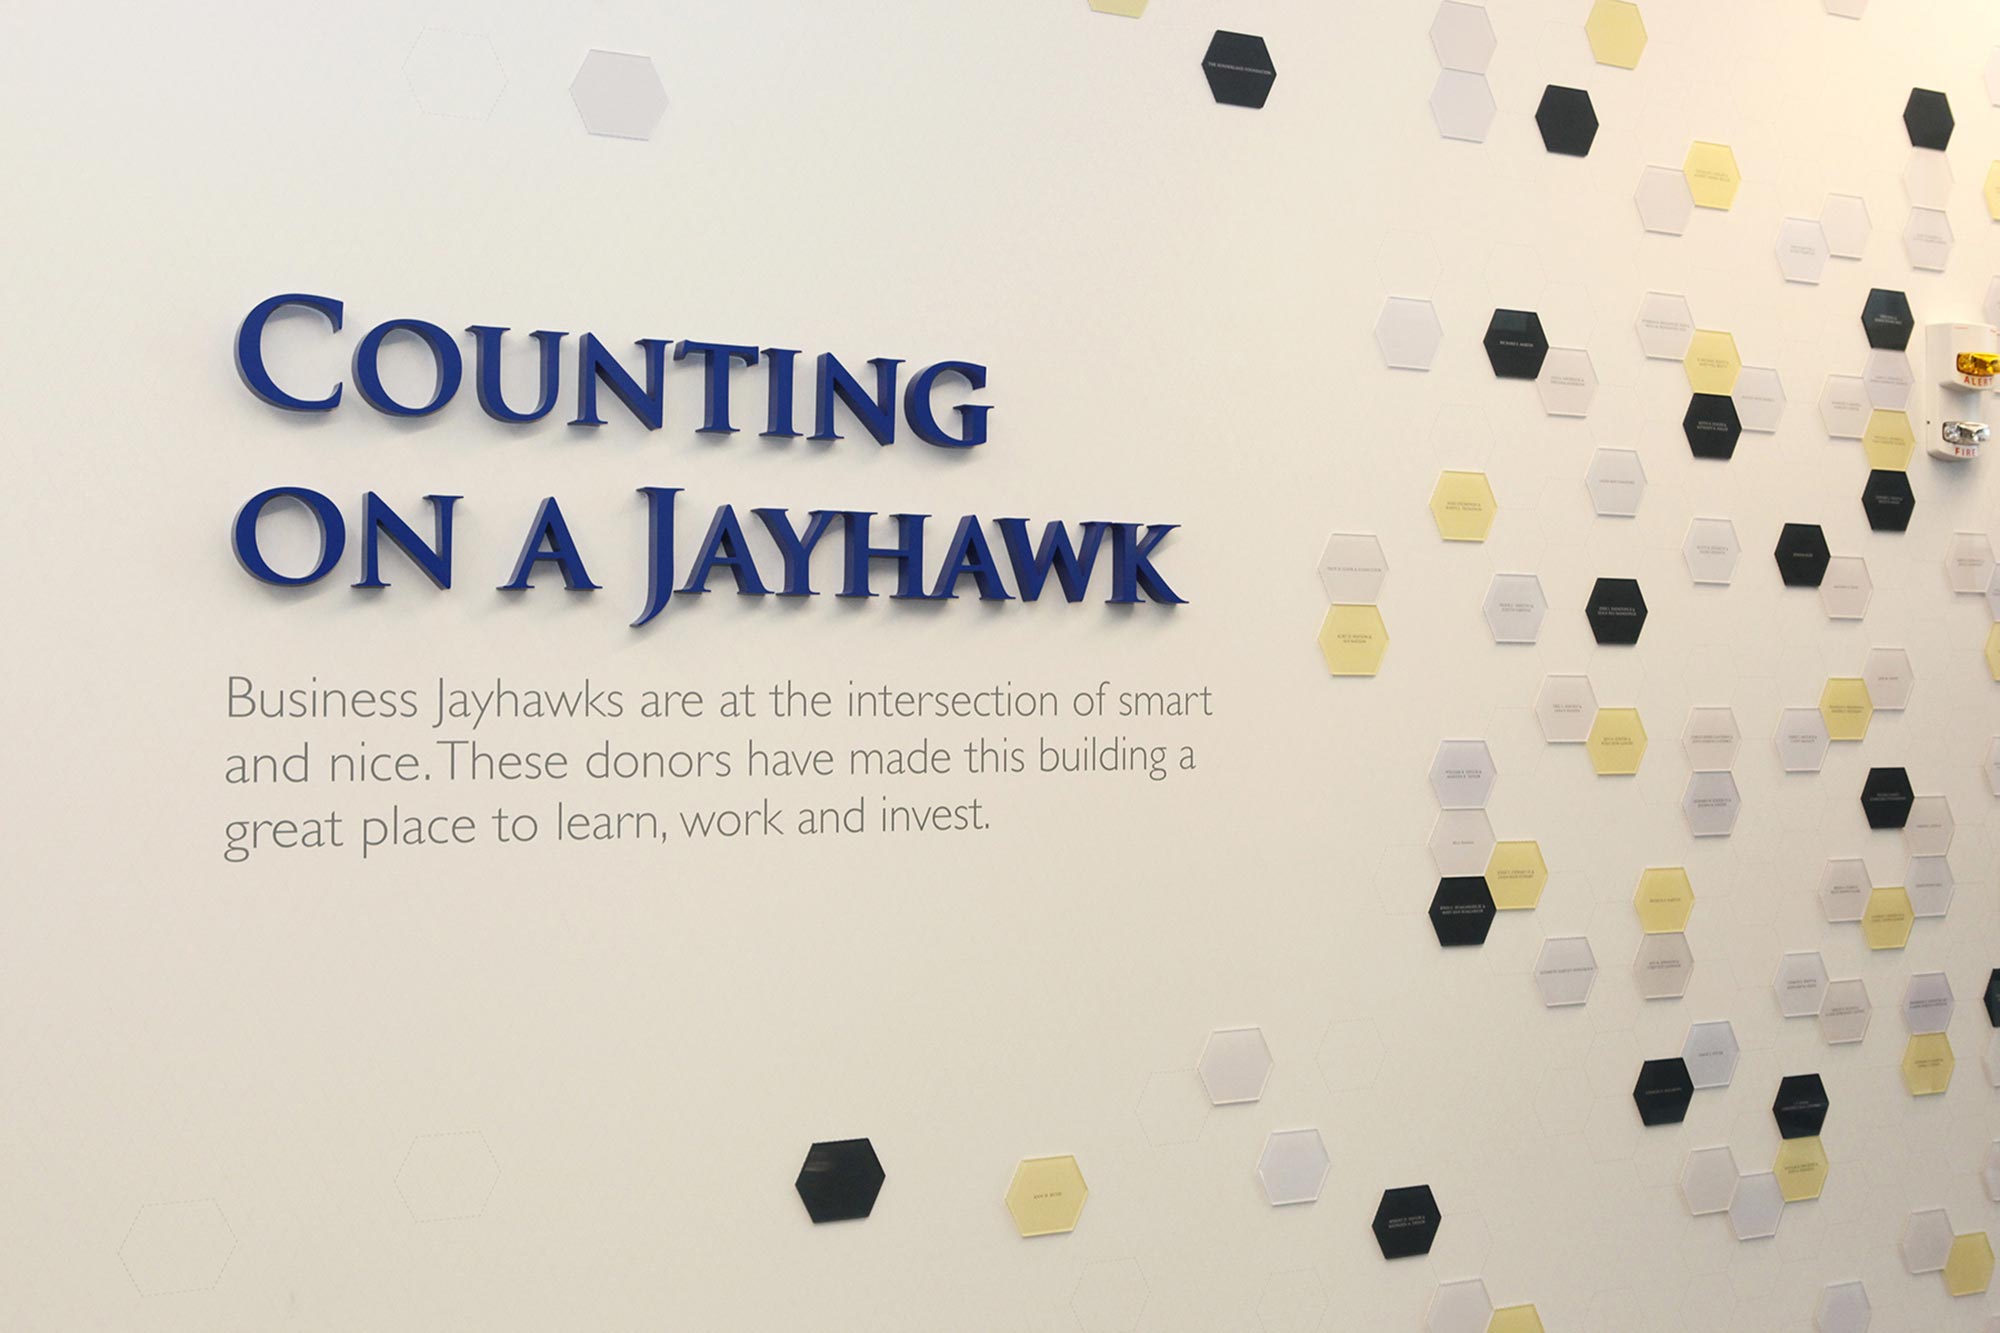 Counting on a Jayhawk